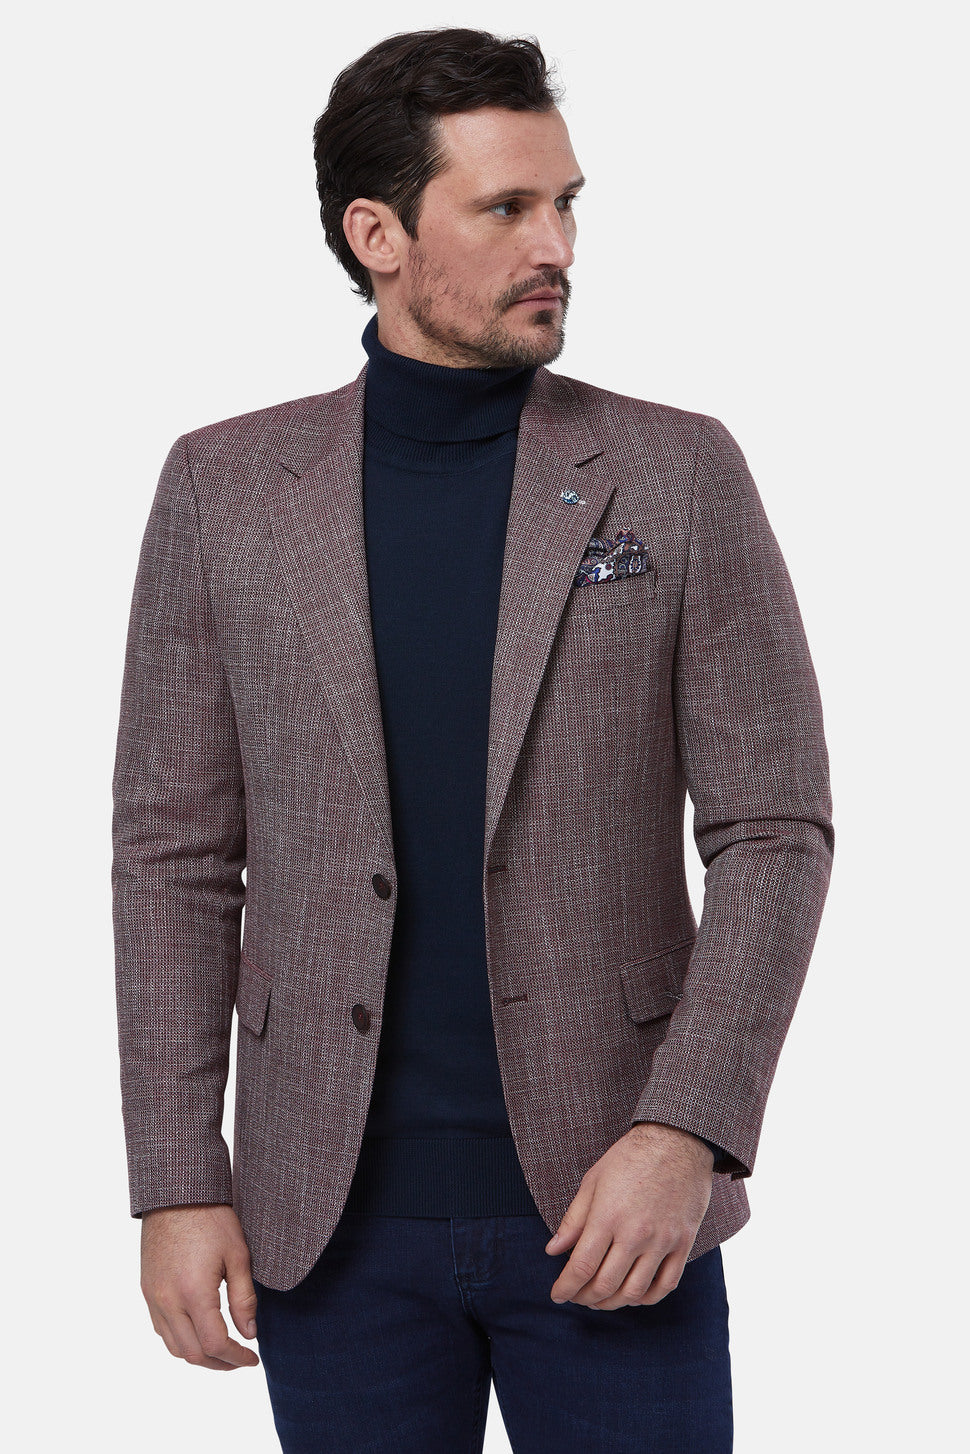 Tripoli Tapered Fit Berry Blazer front